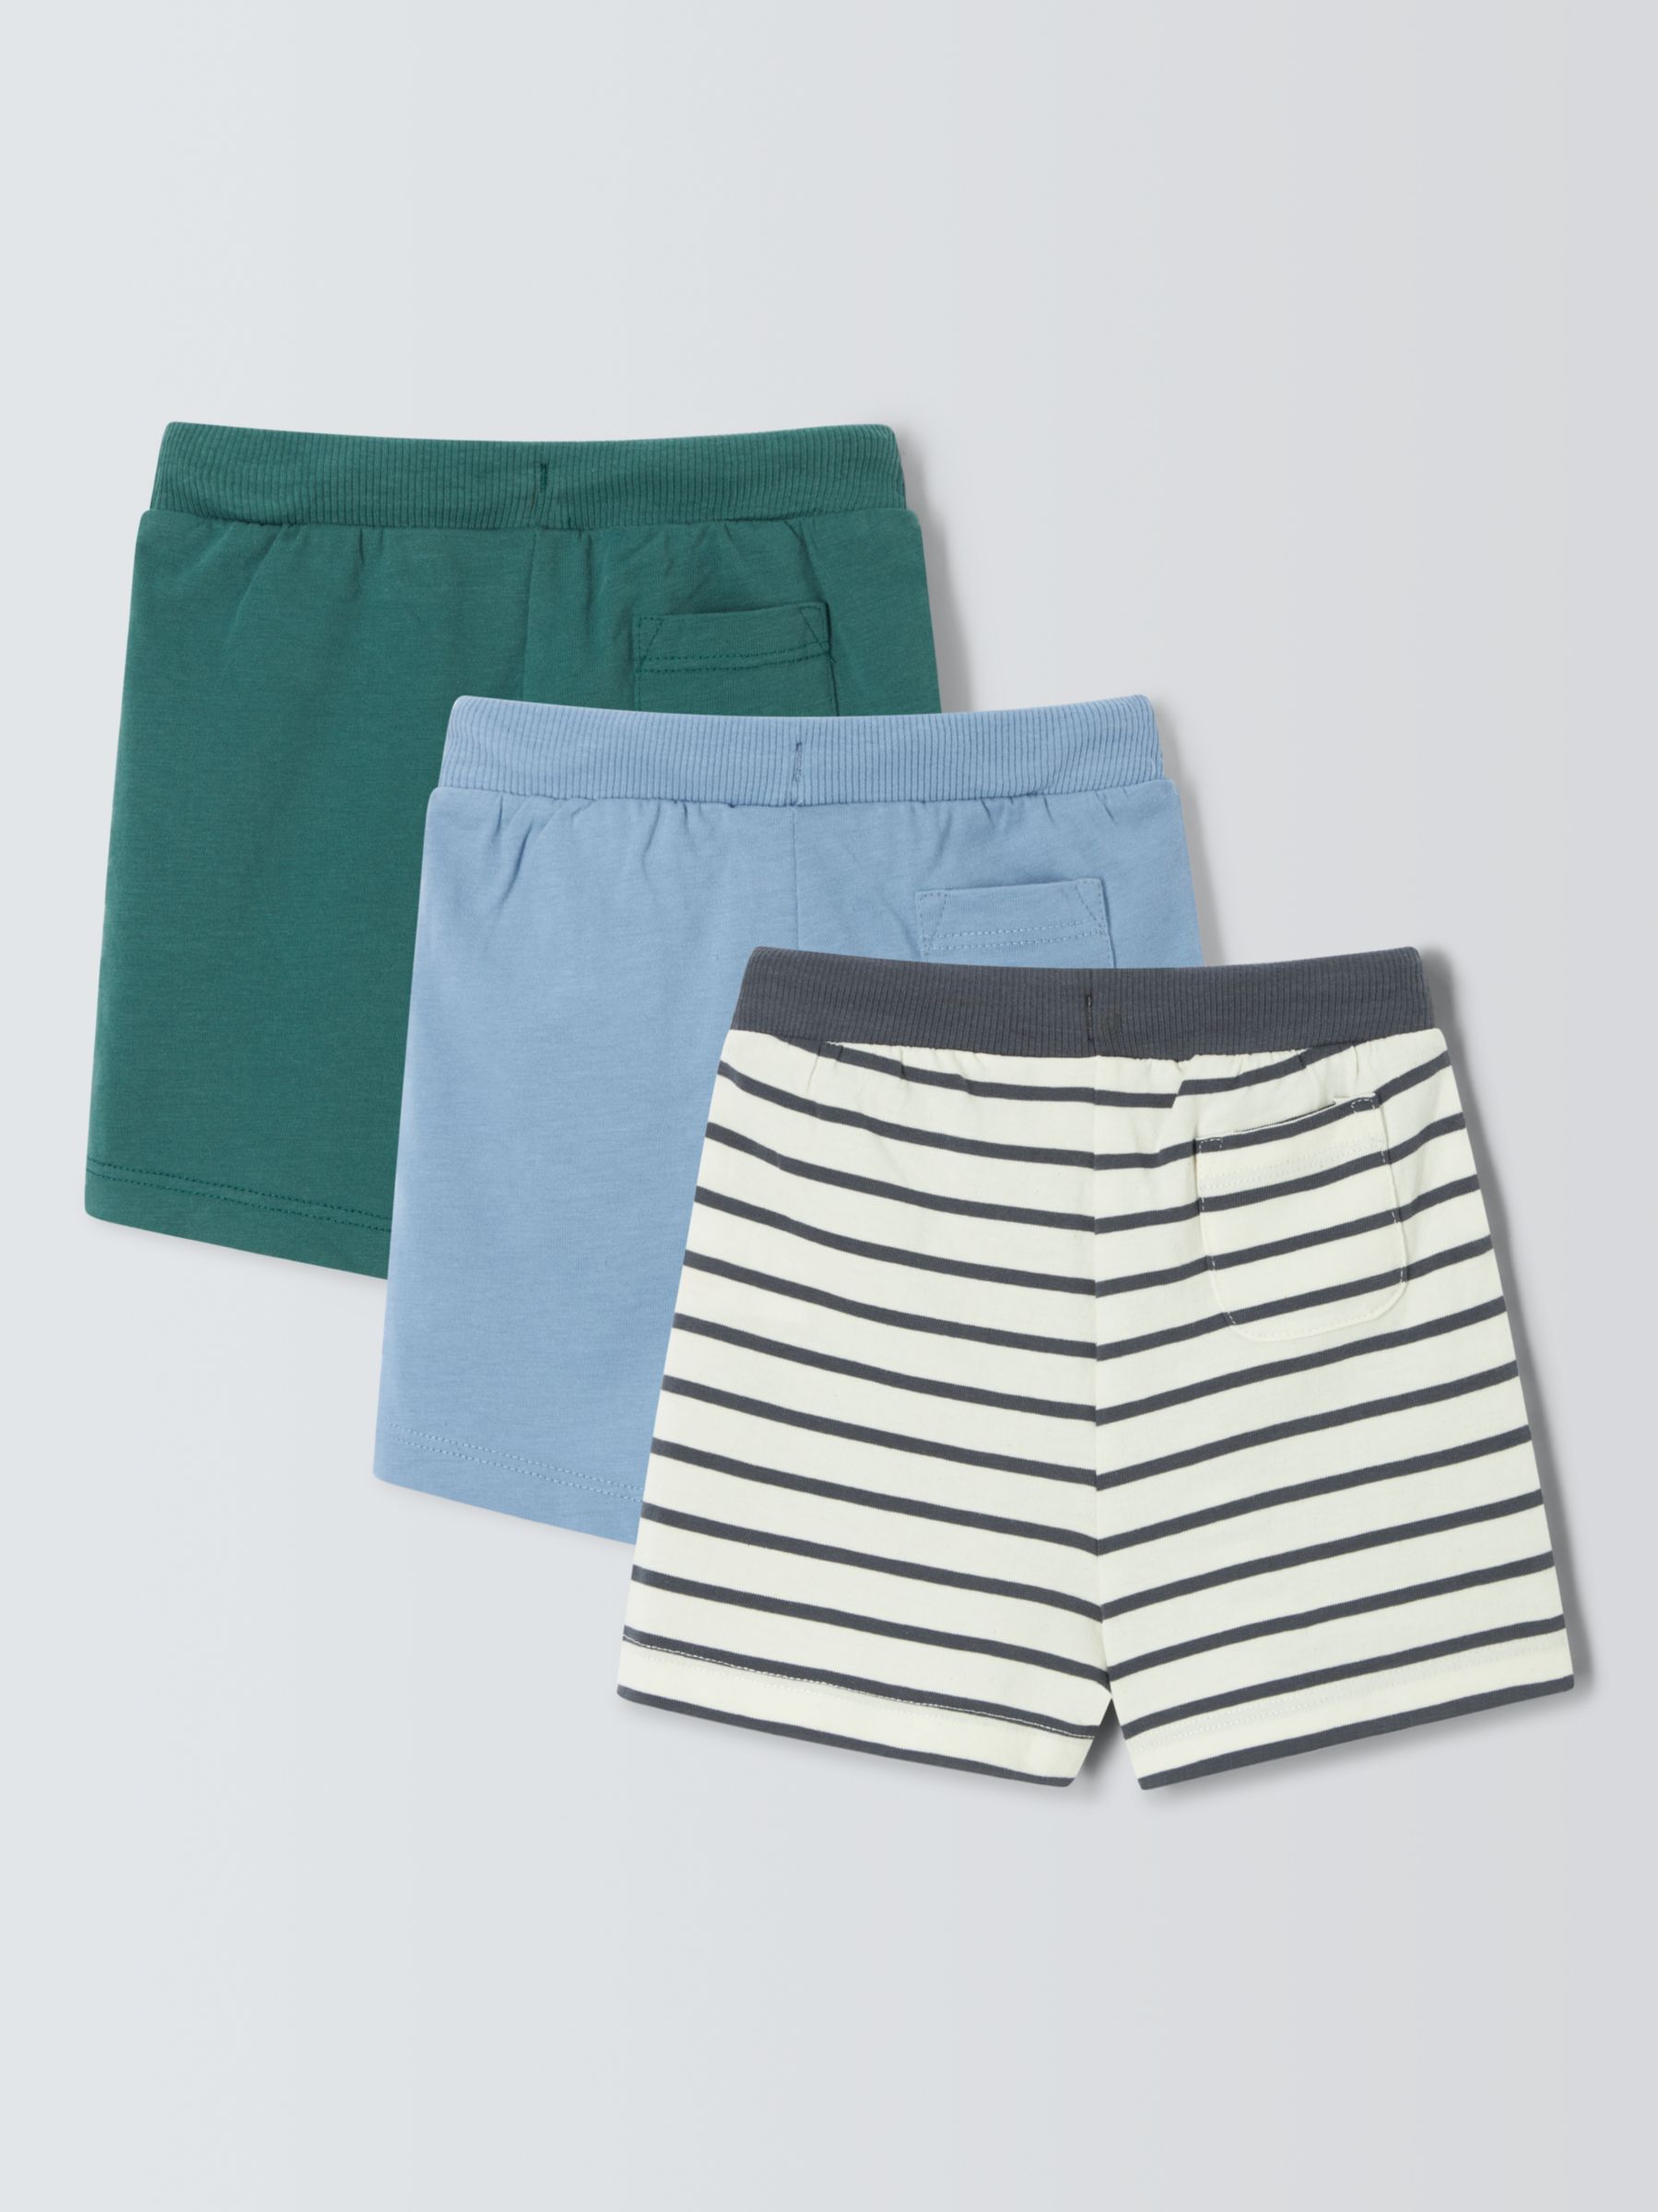 John Lewis Baby Colourblock and Striped Shorts, Pack of 3, Multi, 18-24 months